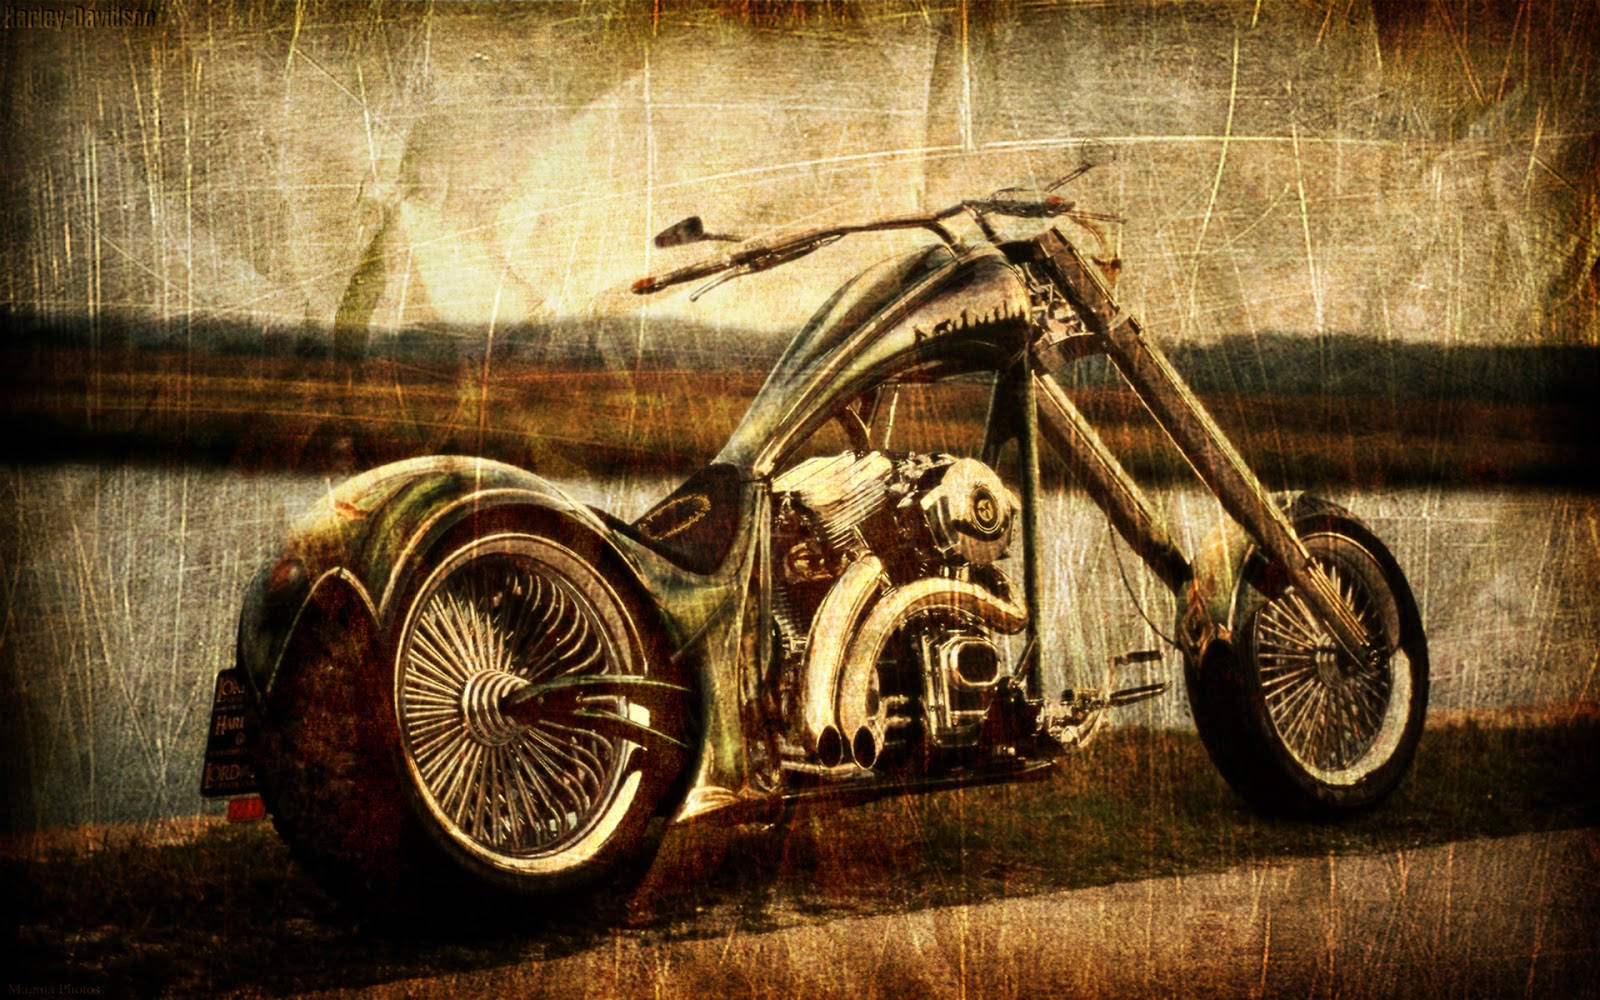 100+] Bobber Motorcycle Wallpapers